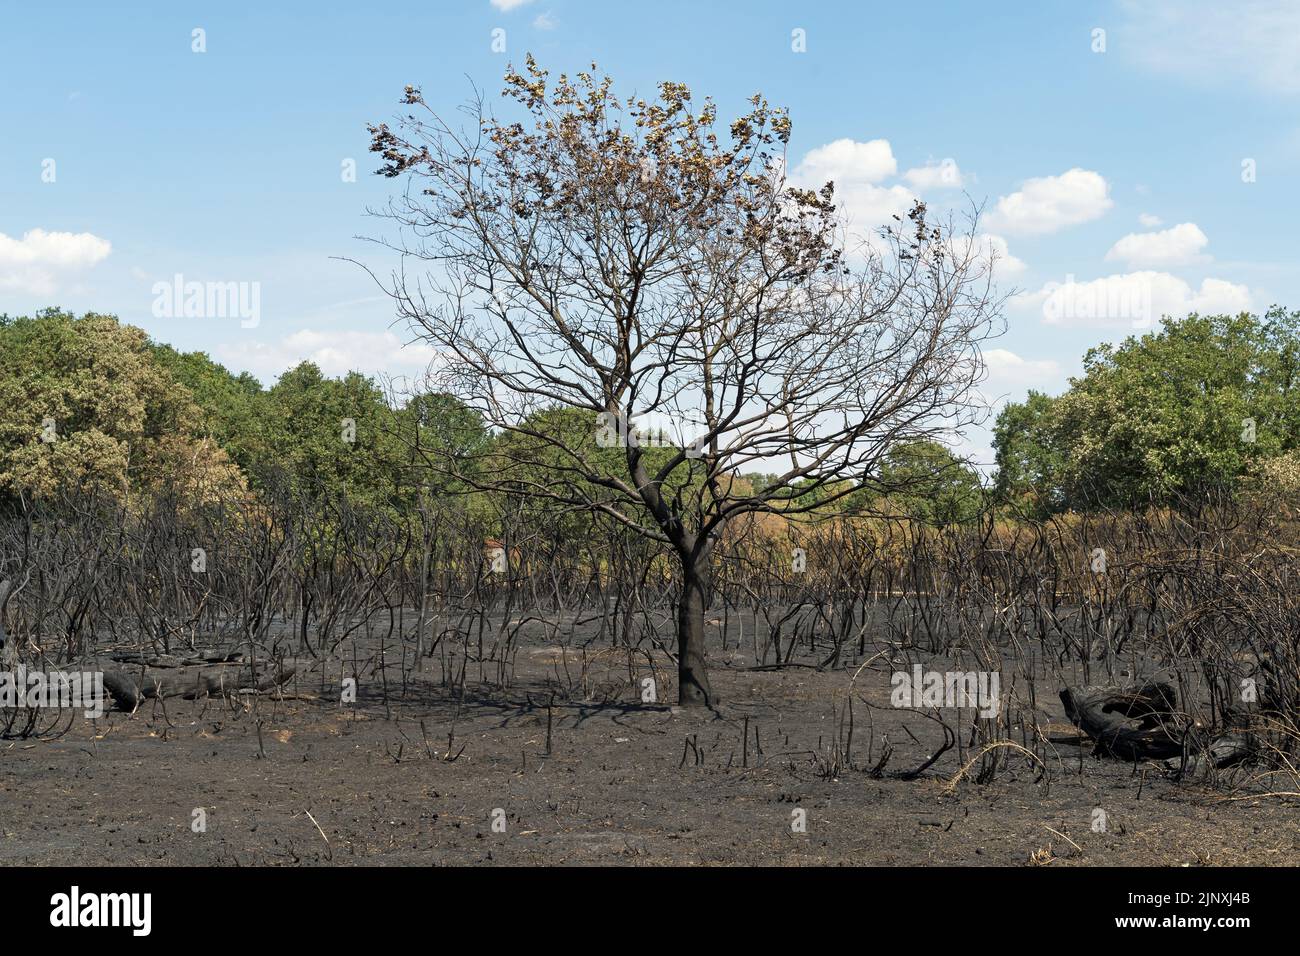 Burned tree and undergrowth at Hollow Ponds after a forest fire due to weeks of heatwave and drought in the summer. Focus on tree Stock Photo